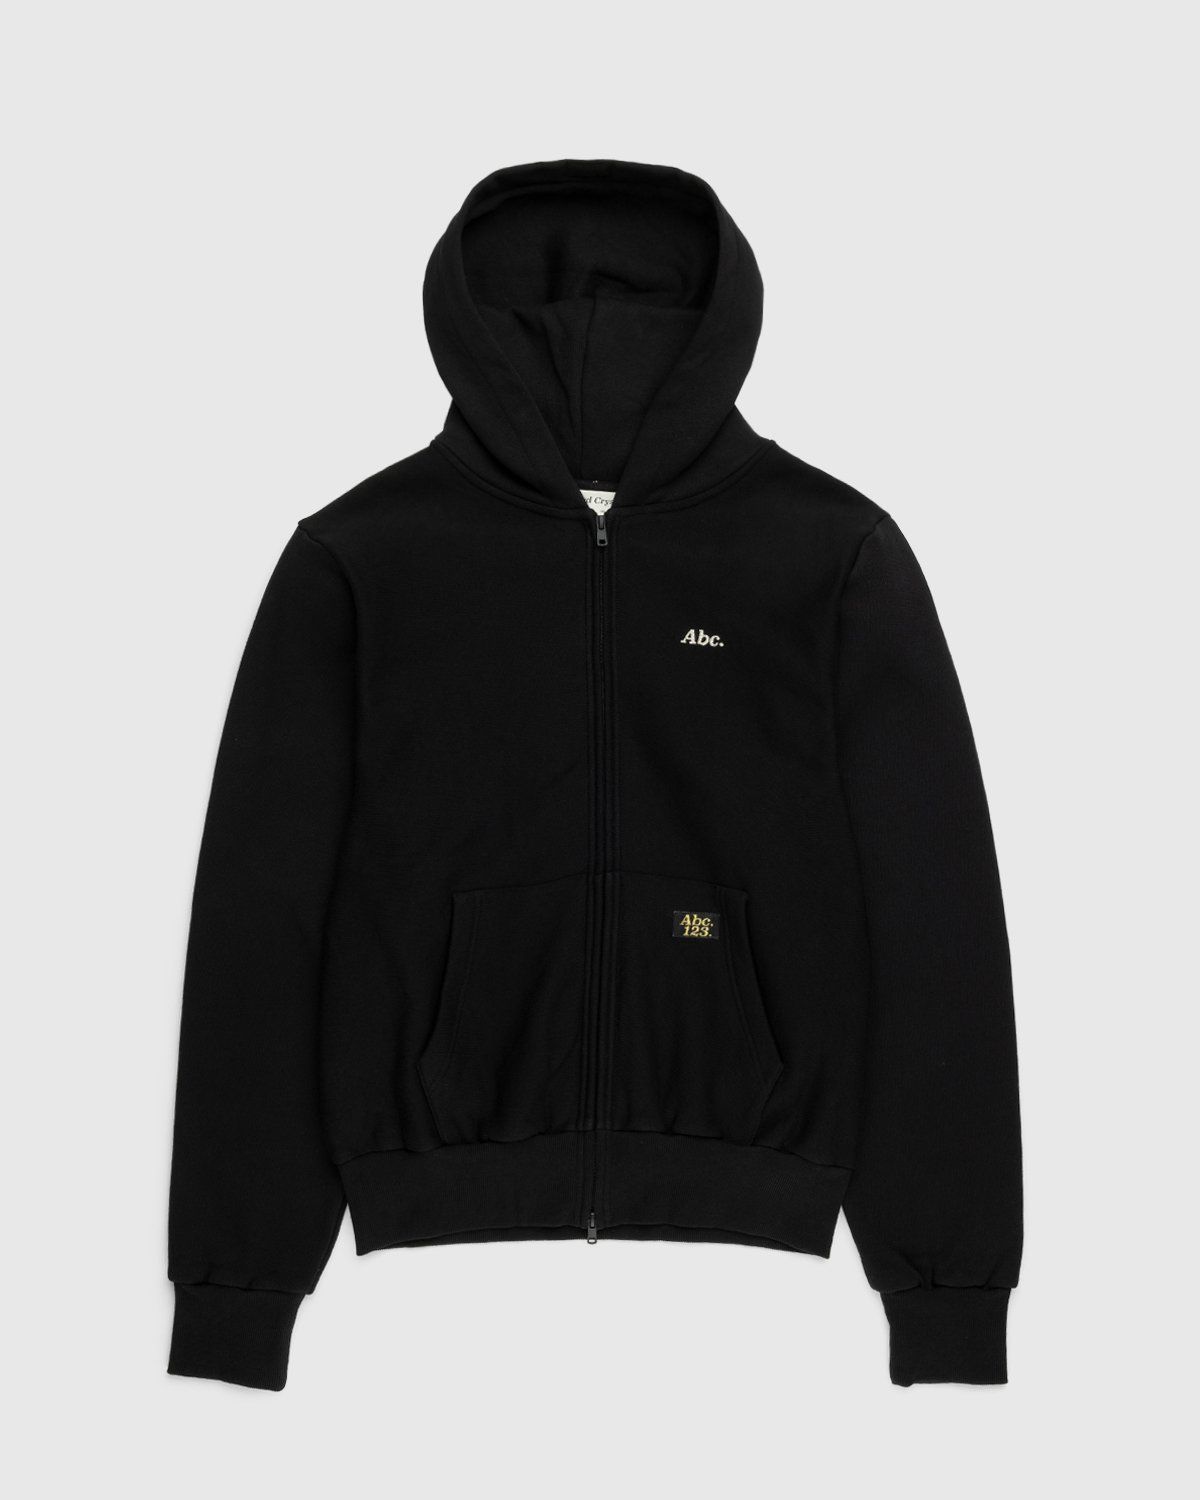 Abc. – Zip-Up French Terry Hoodie Anthracite | Highsnobiety Shop